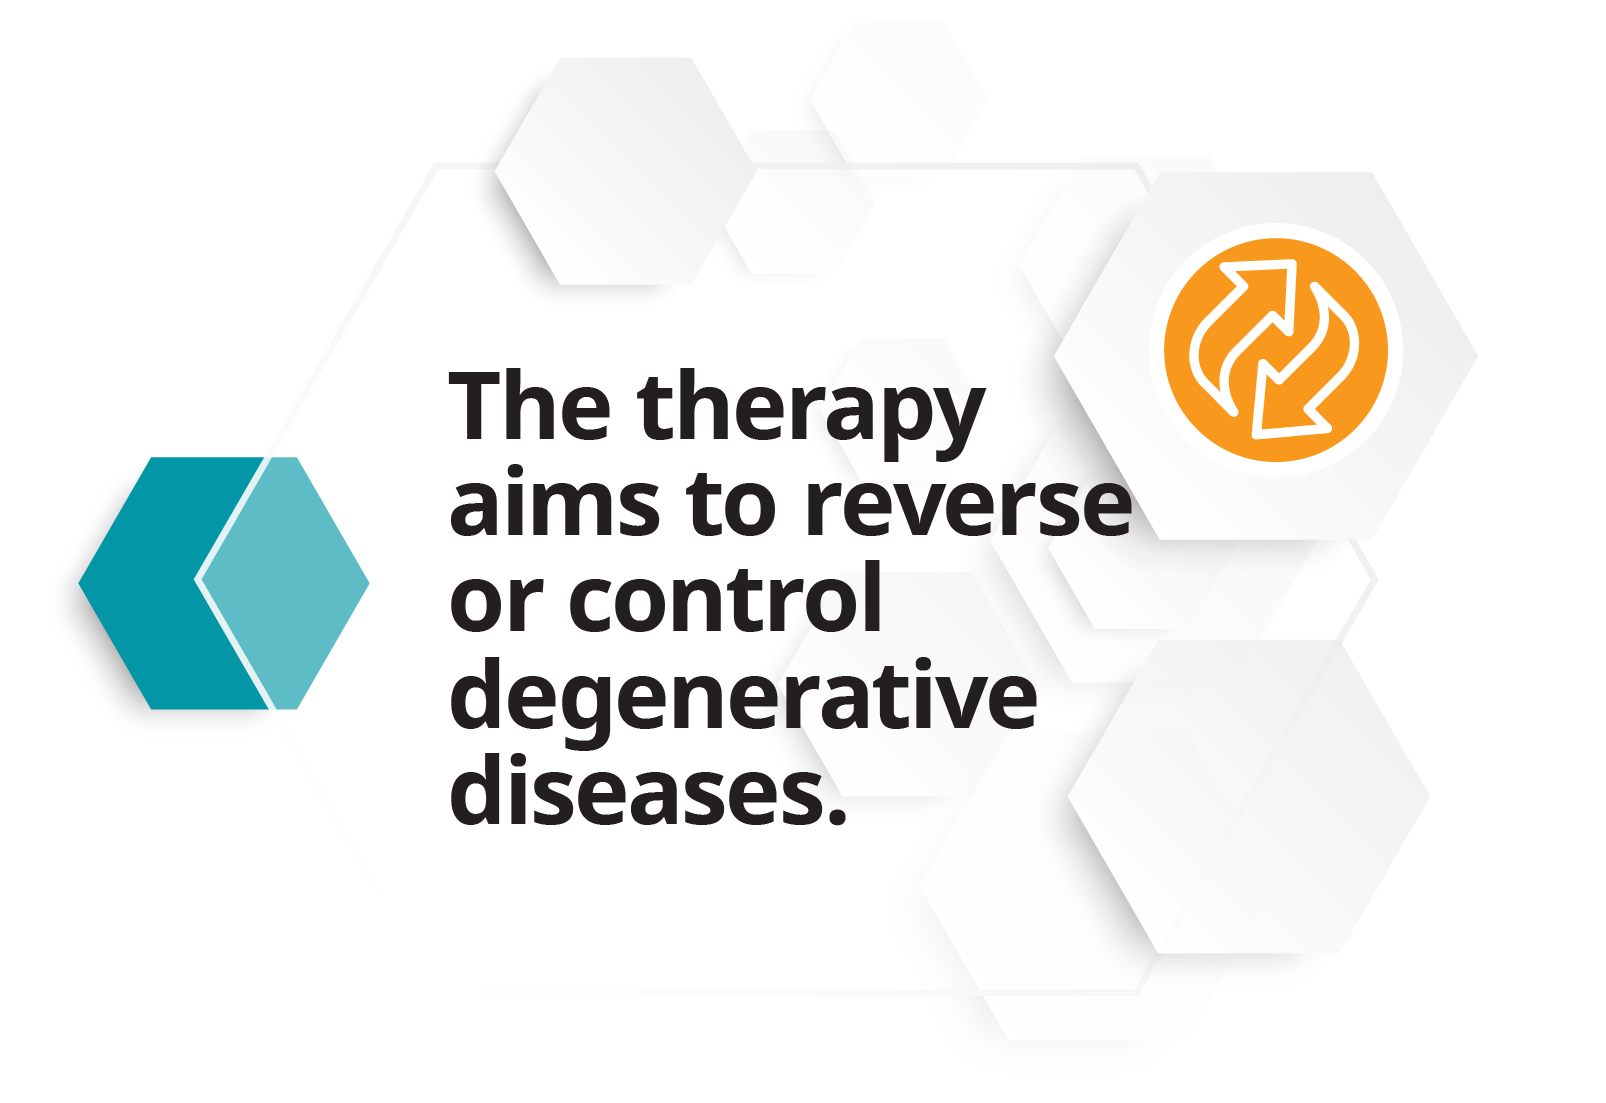 The therapy aims to reserve or control degenerative diseases